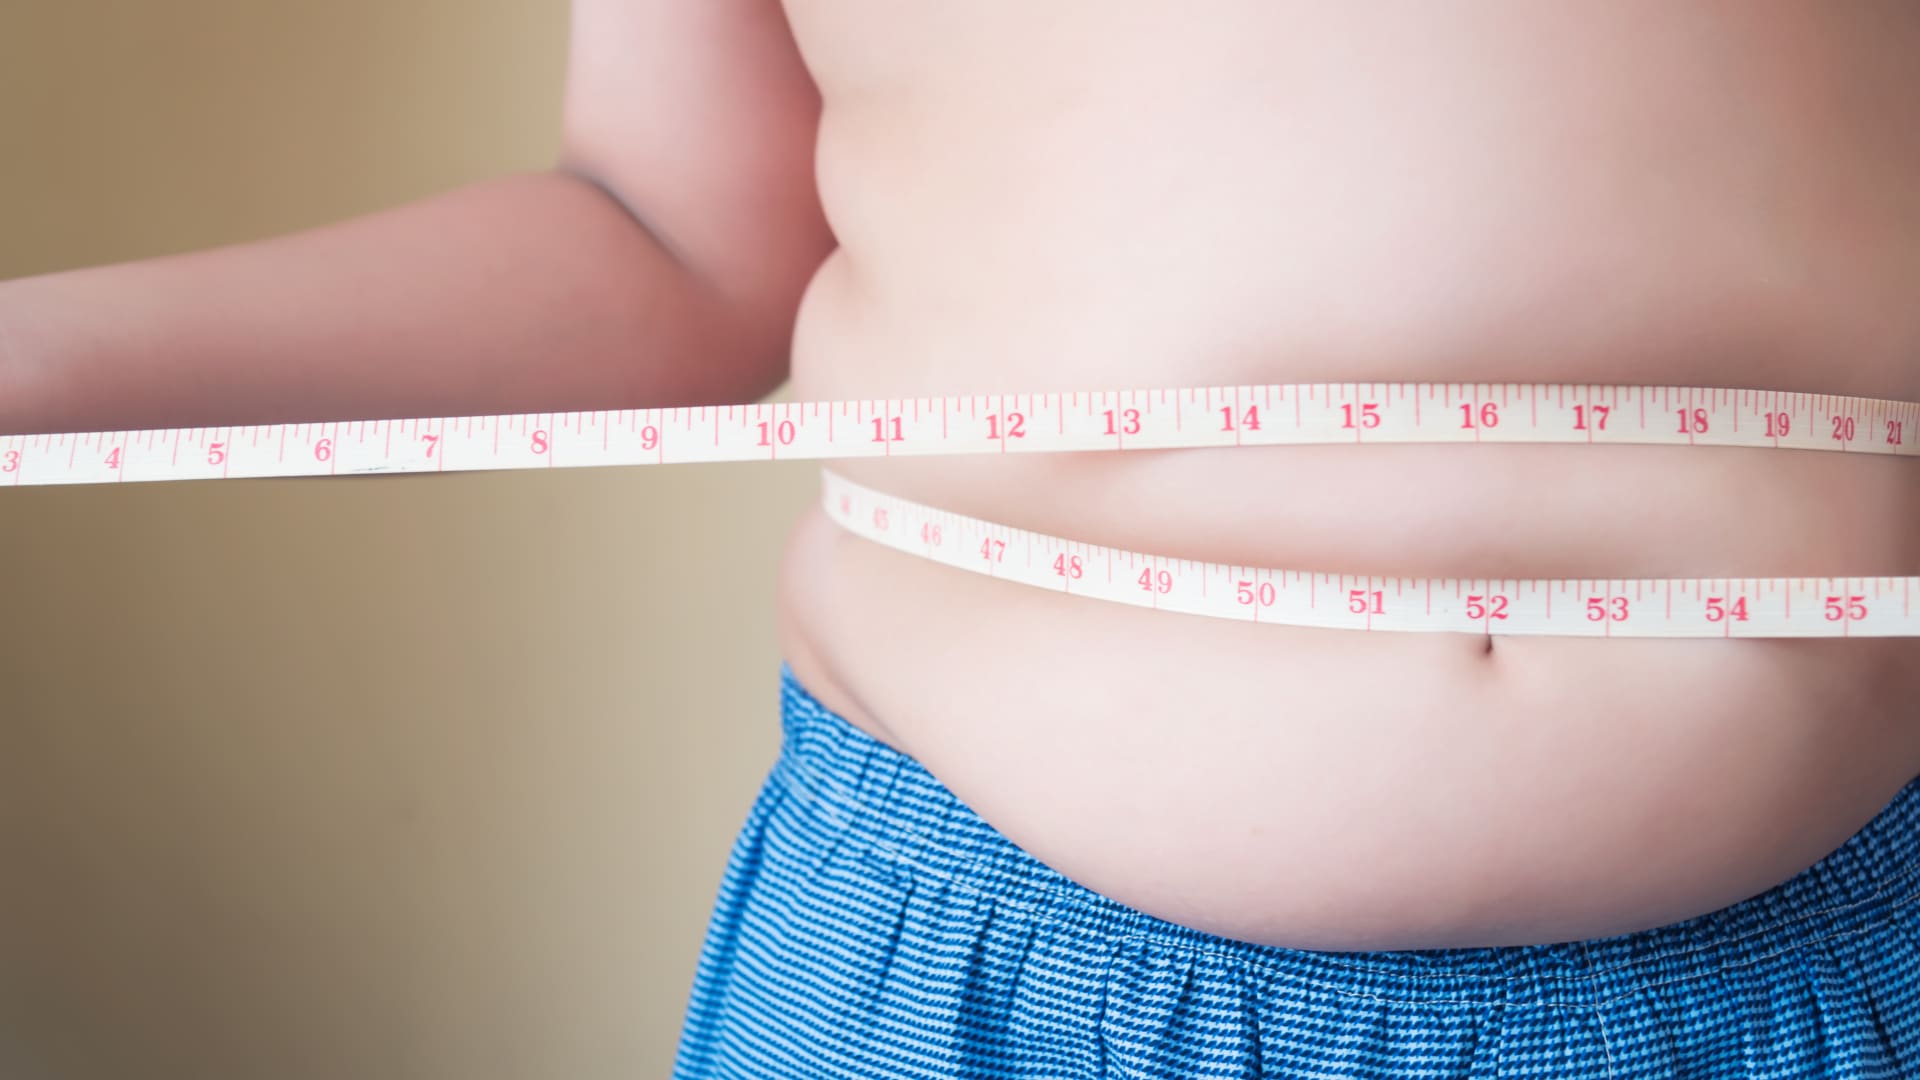 CDC expands BMI charts for severely overweight kids